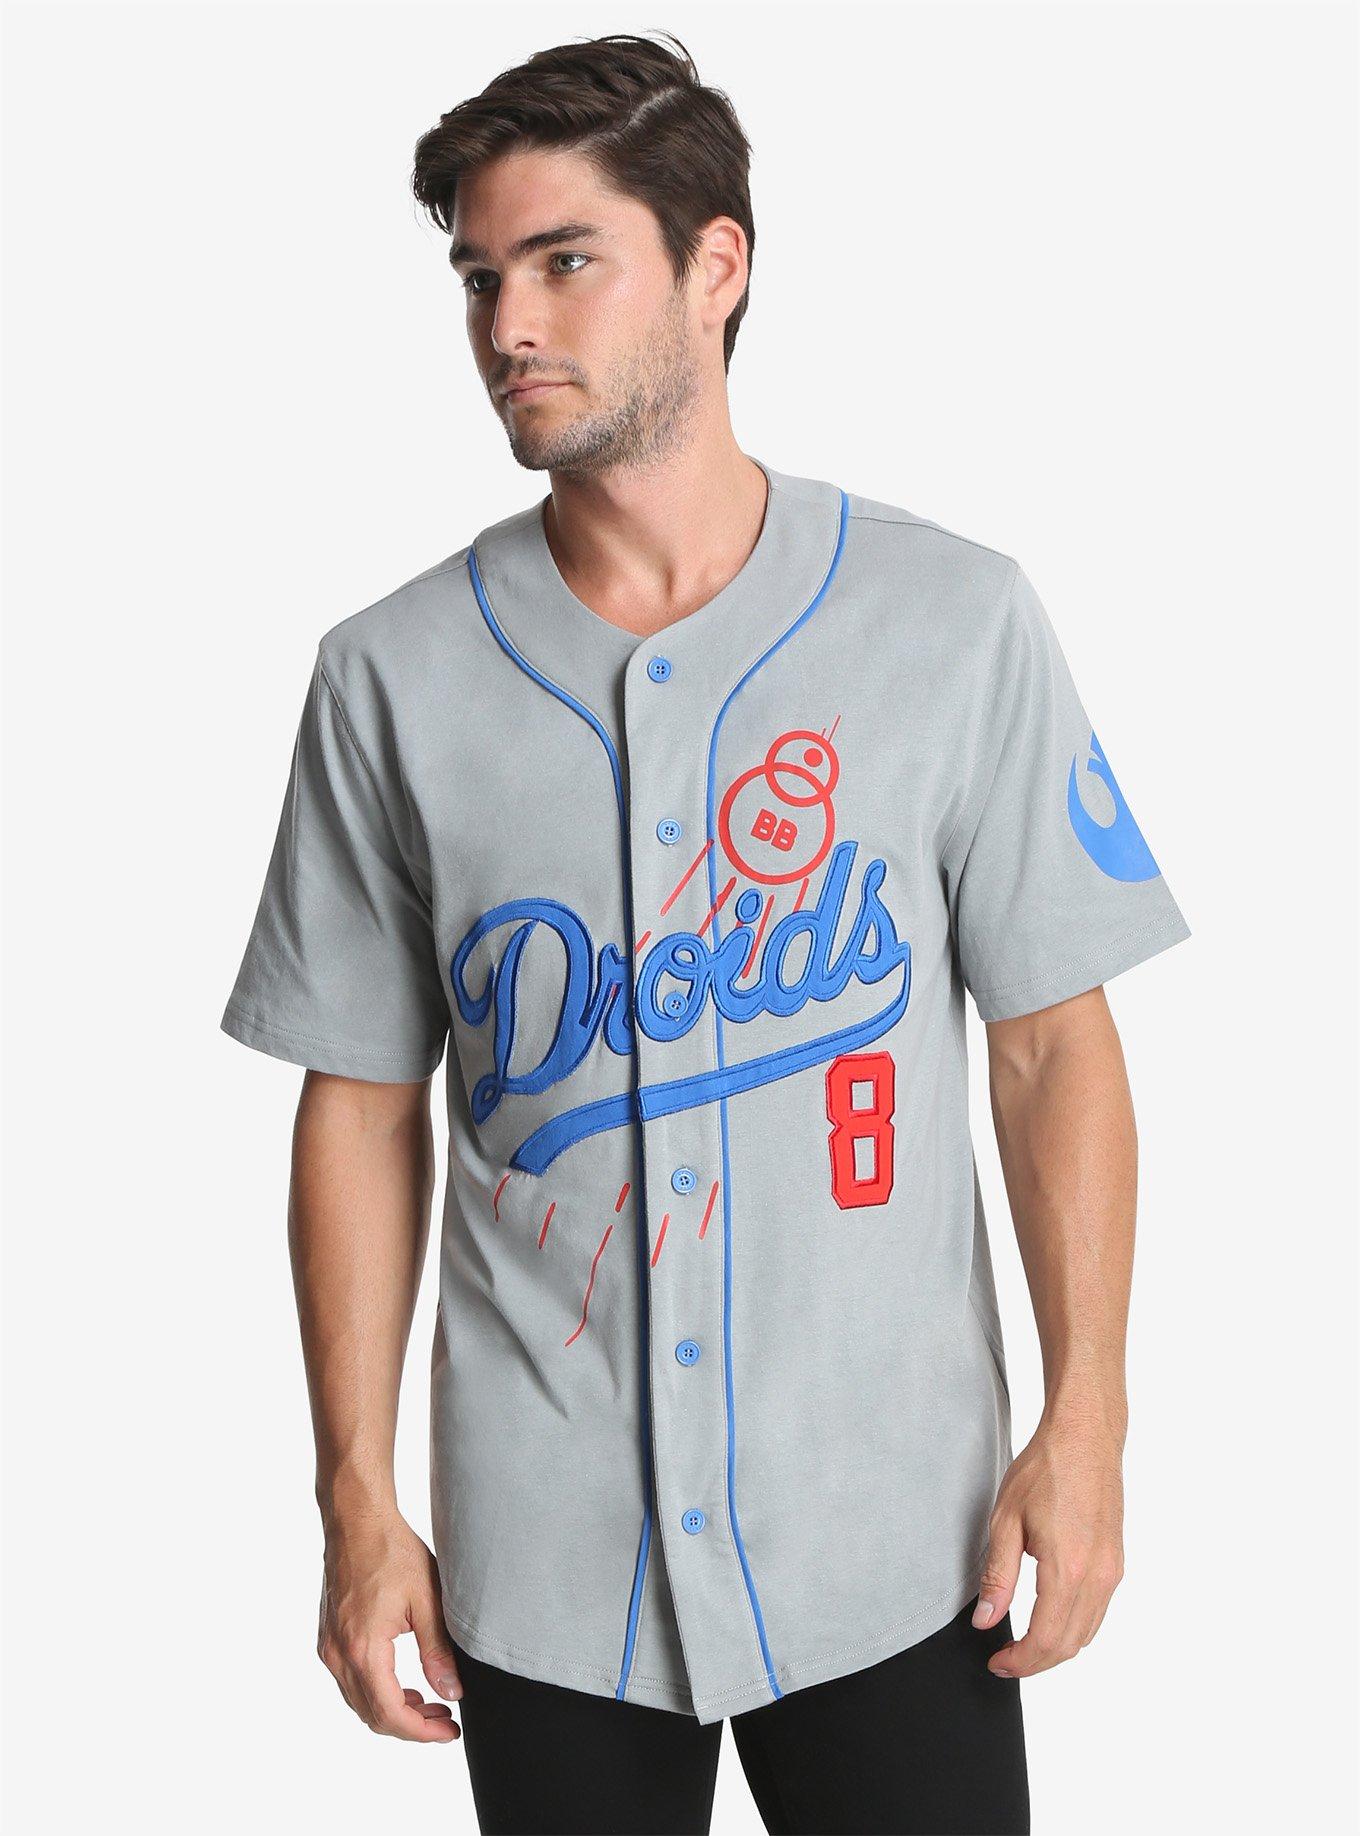 Star Wars Droids Baseball Jersey - BoxLunch Exclusive | BoxLunch